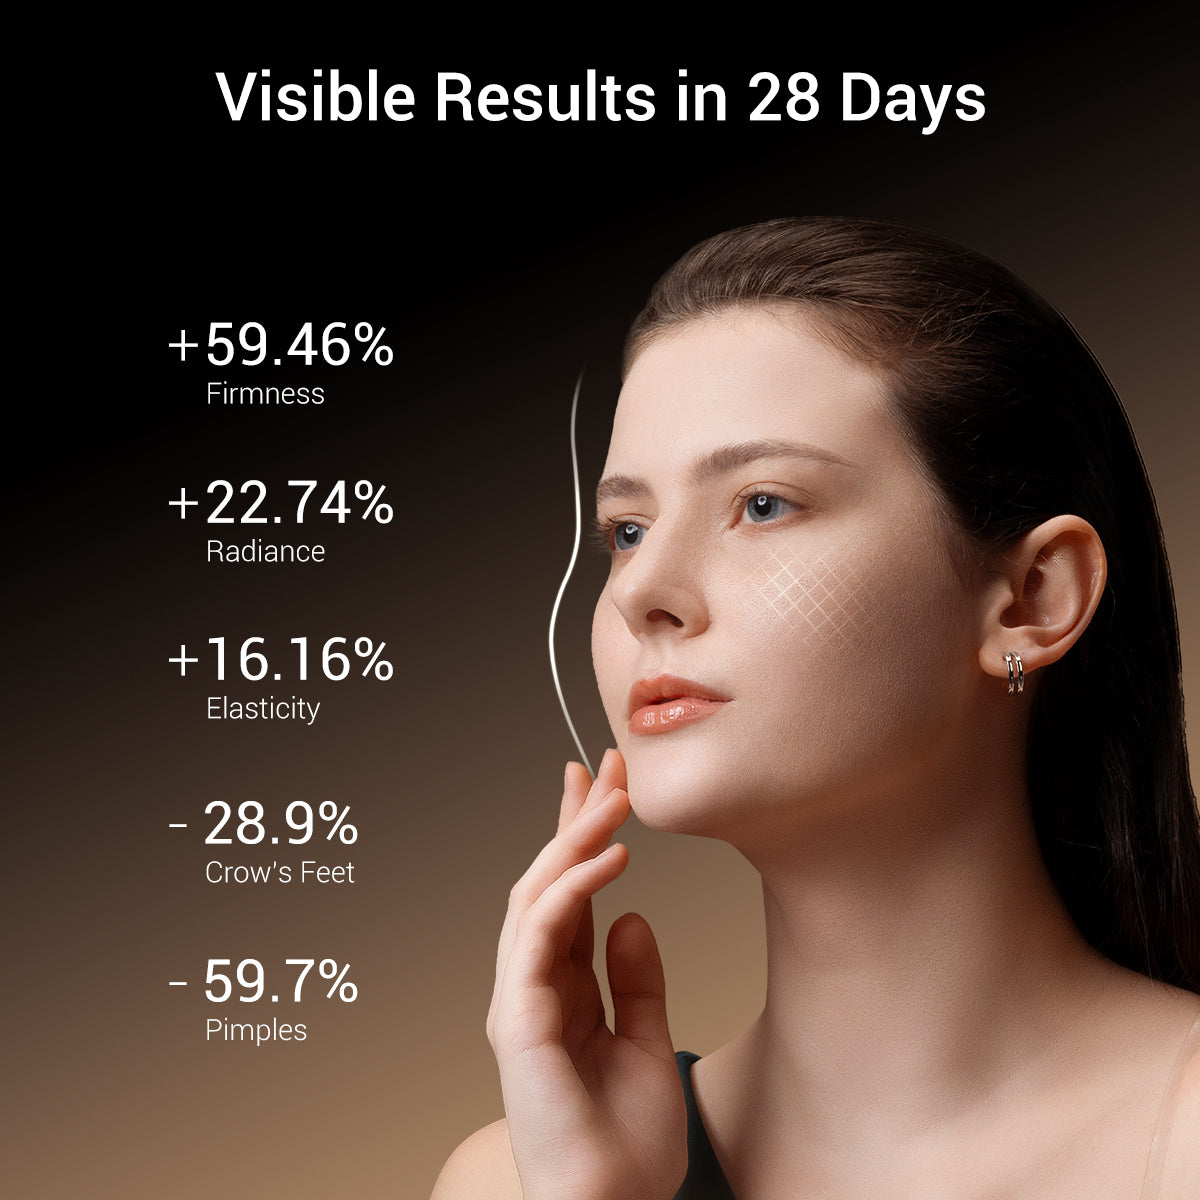 Graphical representation of skin improvement showing increased firmness, radiance, elasticity, and reduced crow's feet and pimples in 28 days.